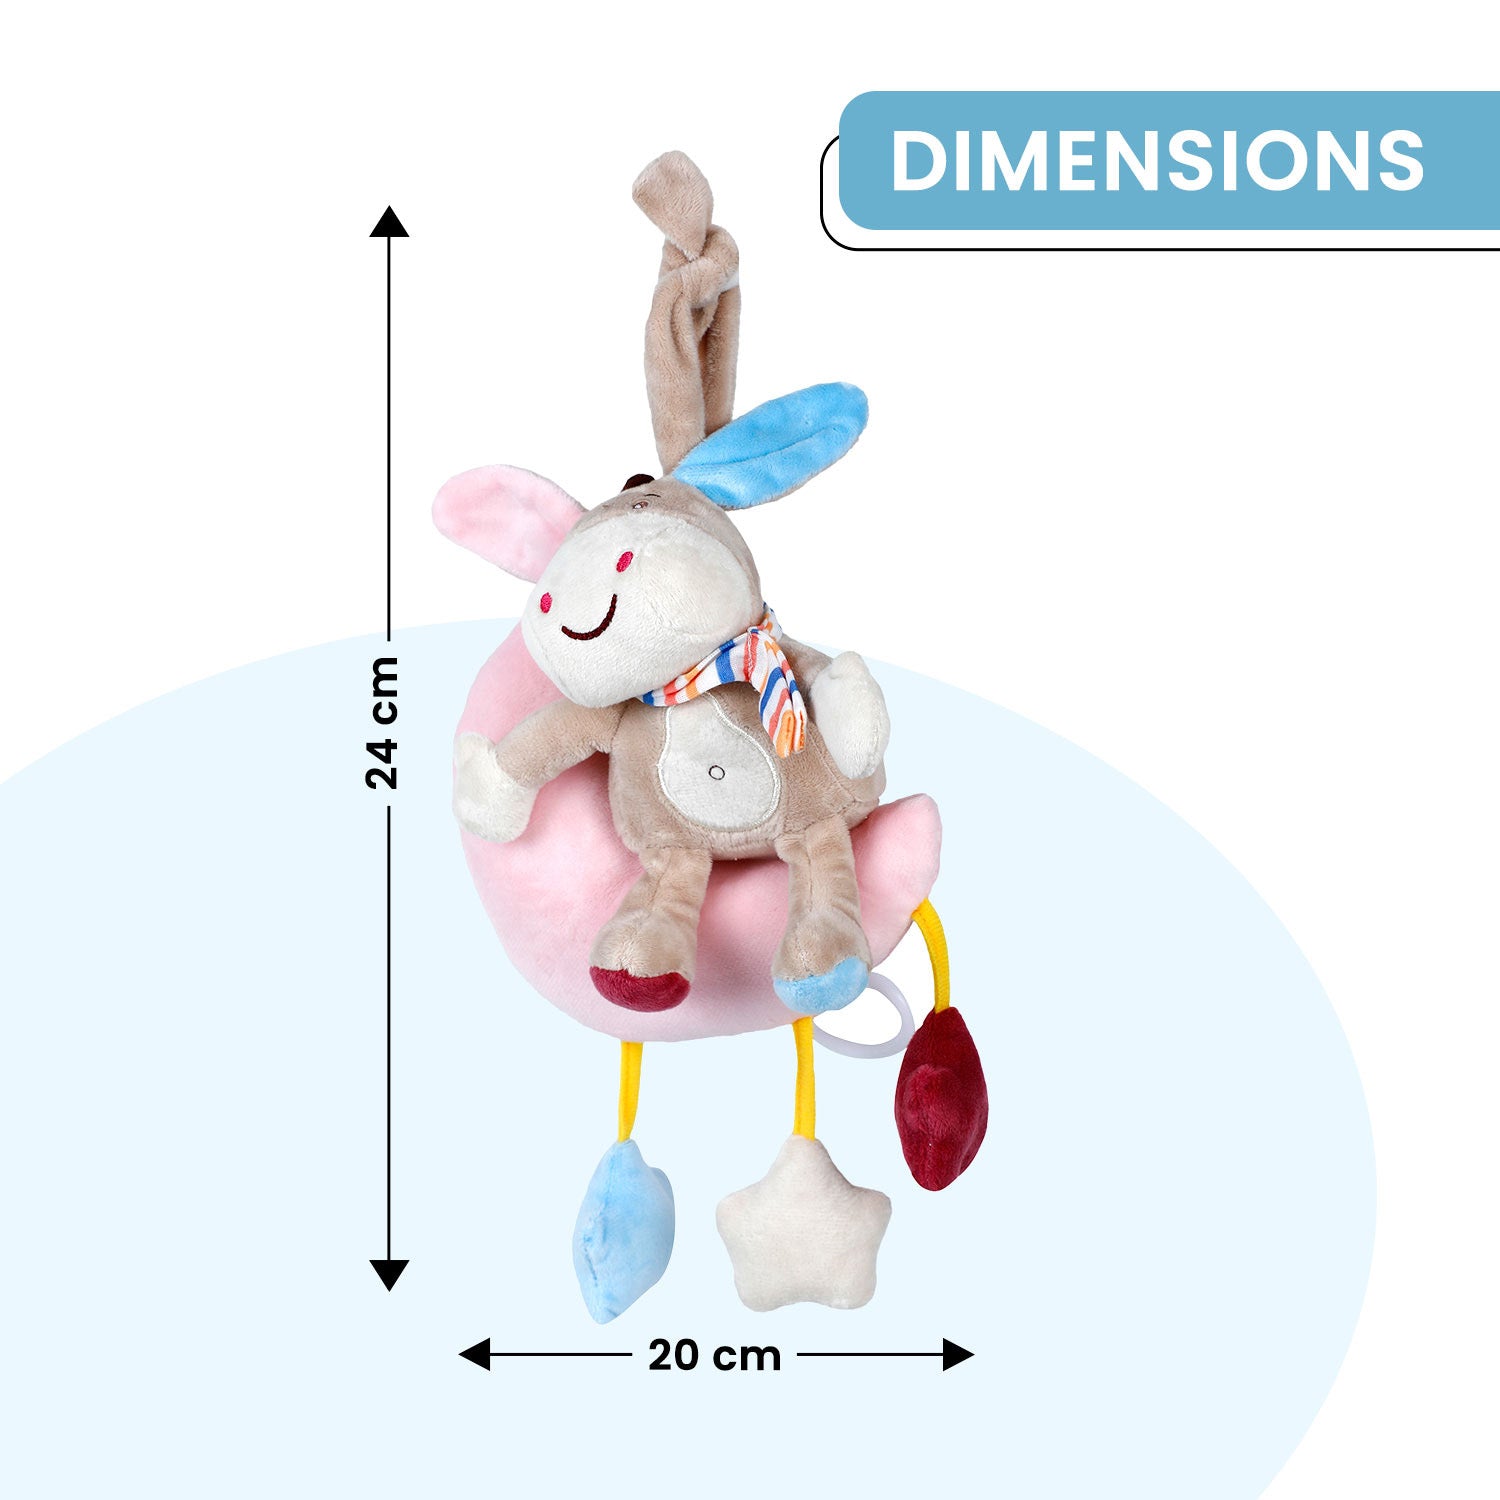 Baby Moo Smiling Sheep Hanging Musical Pulling Toy - Peach